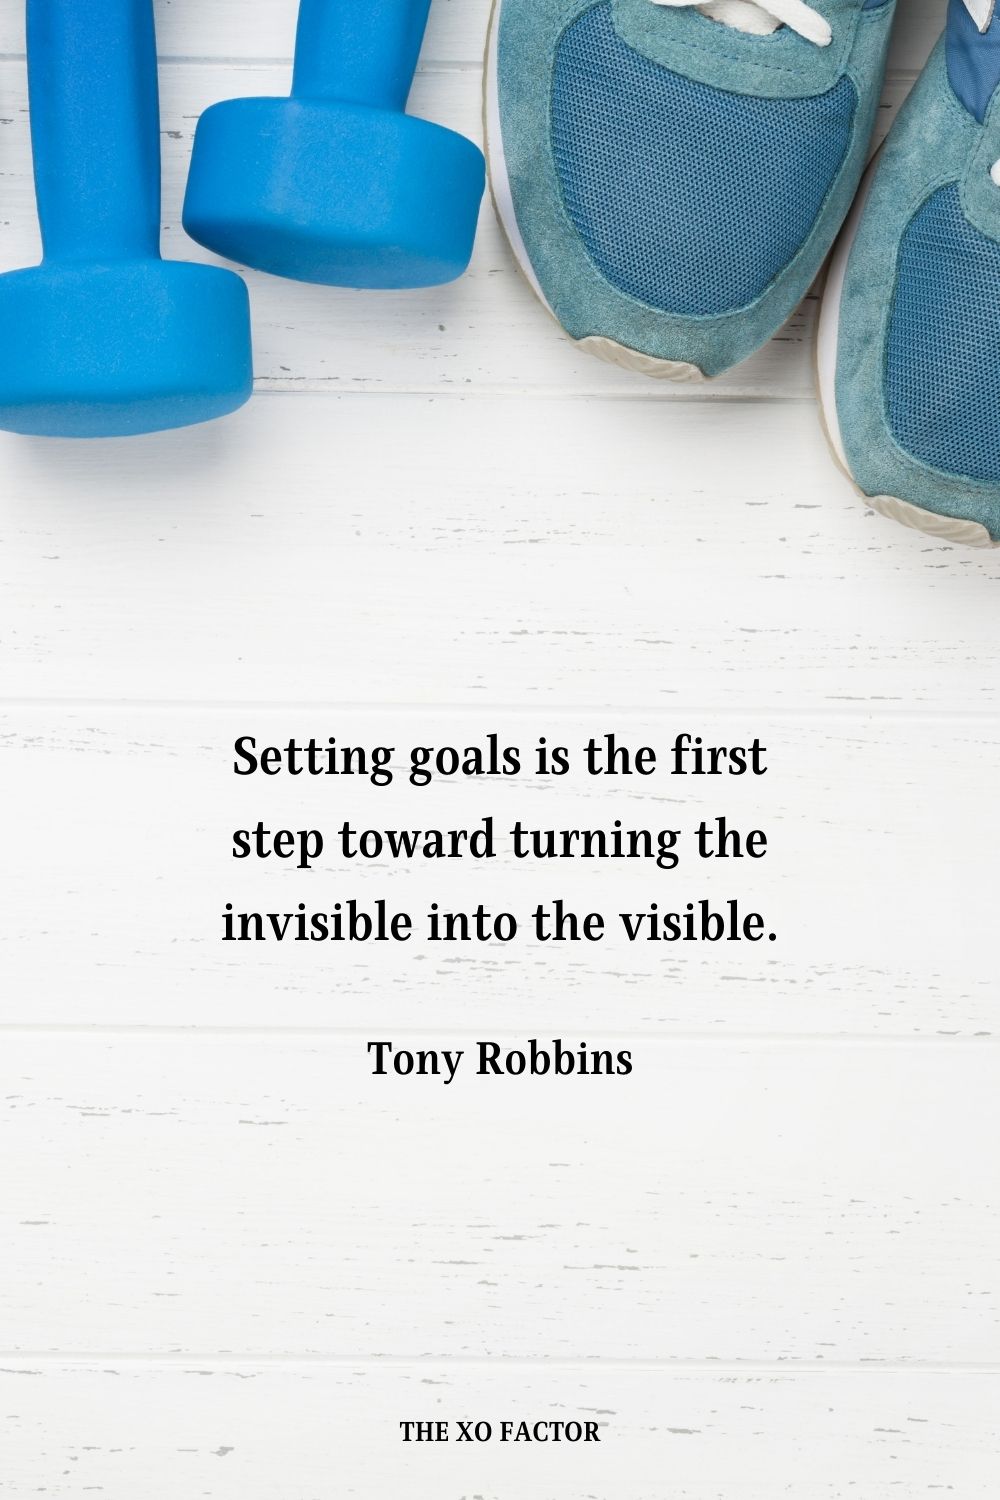 Setting goals is the first step toward turning the invisible into the visible. Tony Robbins